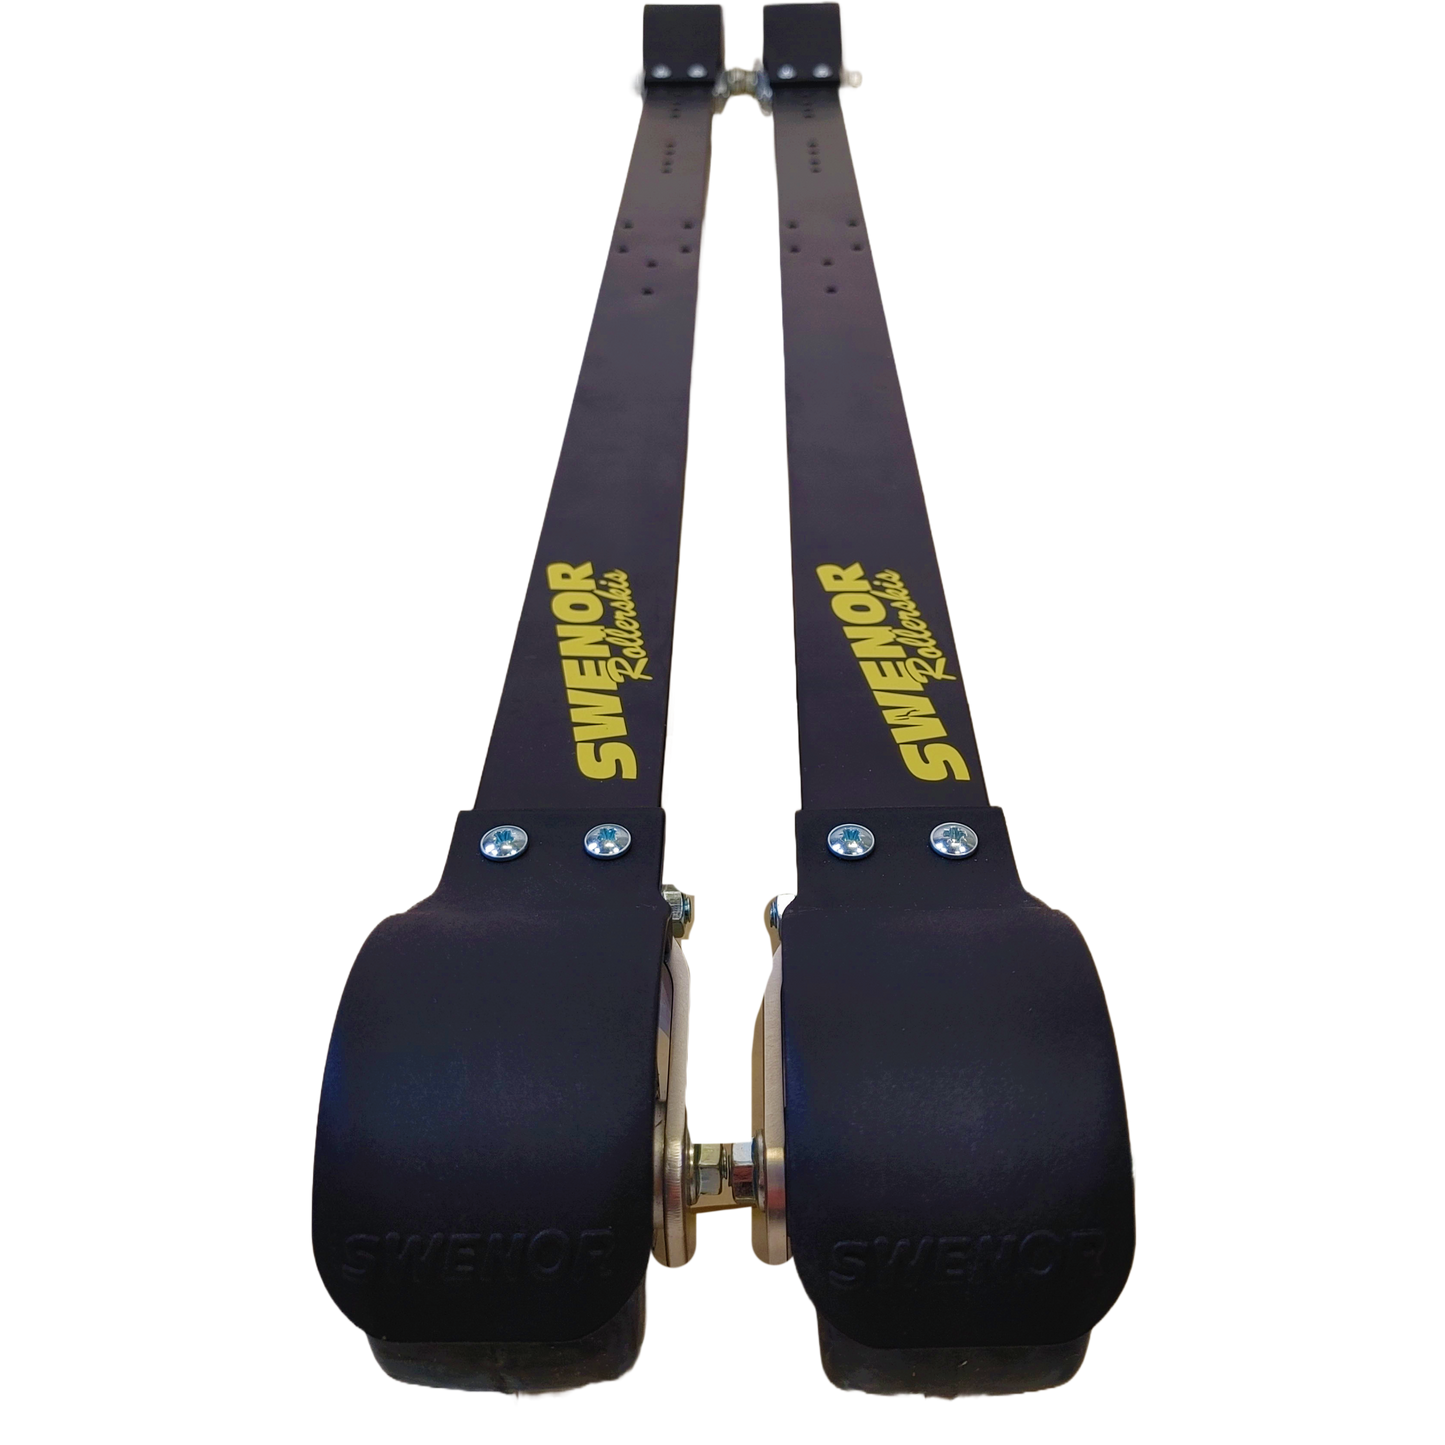 A longer aluminium classic rollerski with better ground contact for striding. 